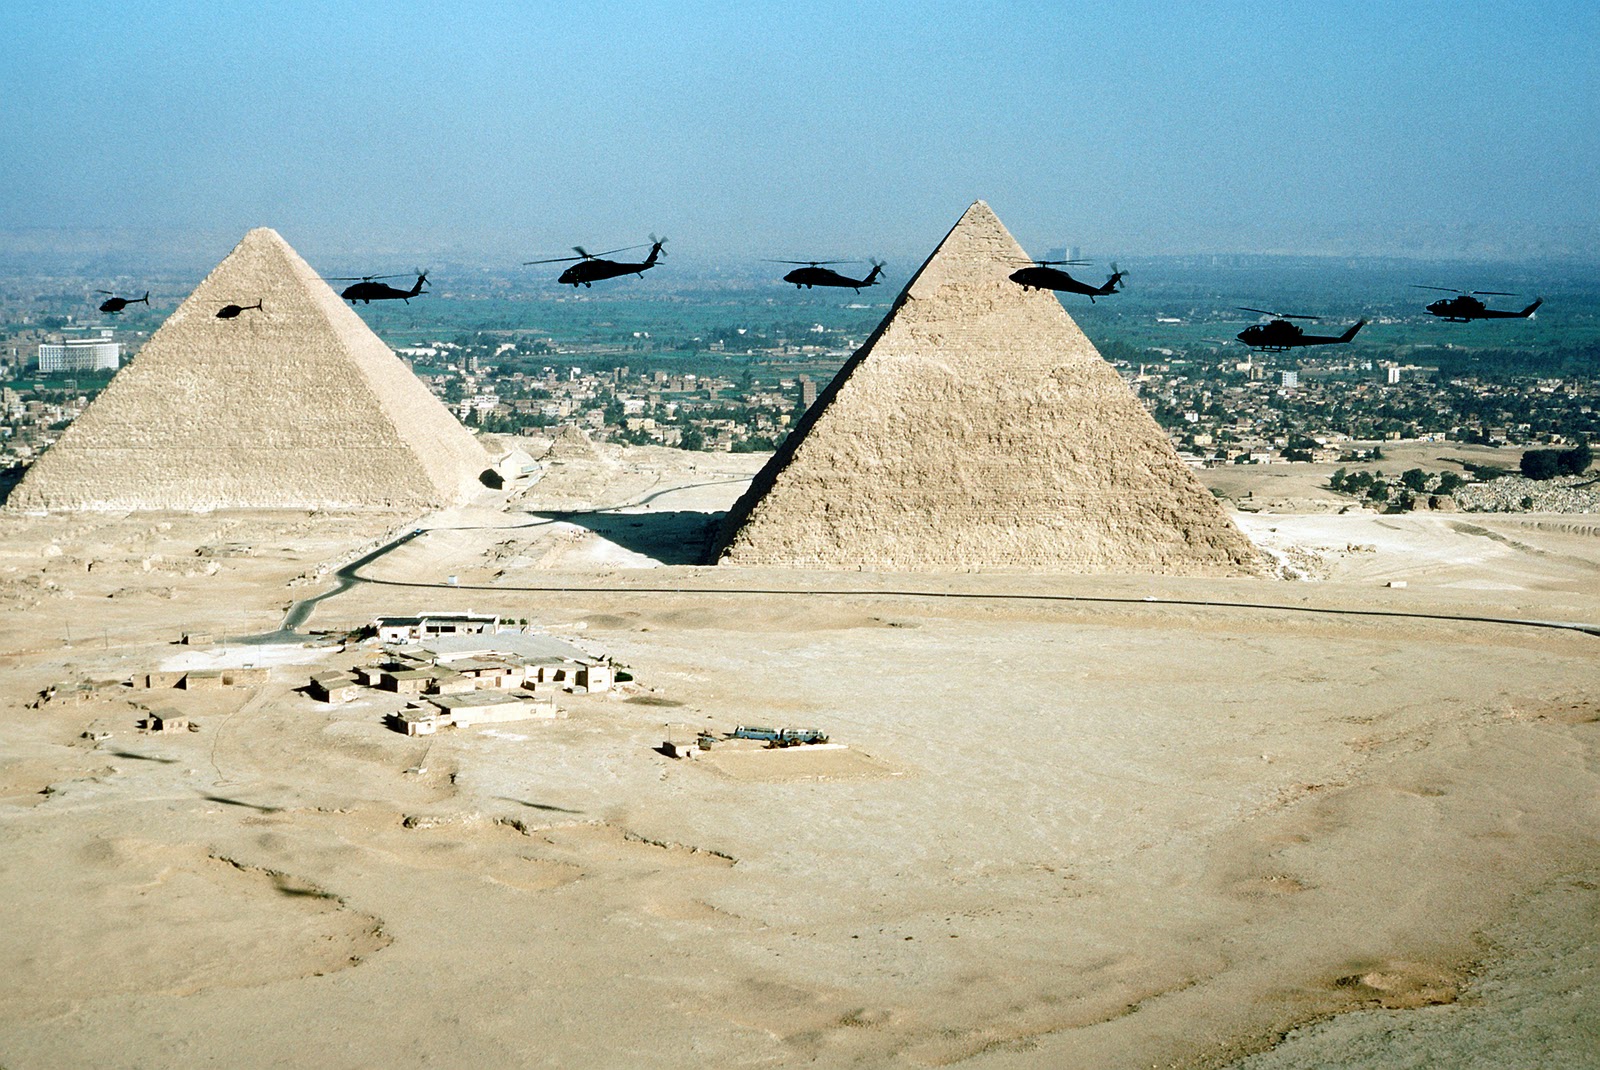 gpw-20040823-UnitedStates-DefenseVisualInformationCenter-DF-ST-82-06256-military-helicopters-The-Great-Pyramids-West-Cairo-Egypt-19801109-original.jpg